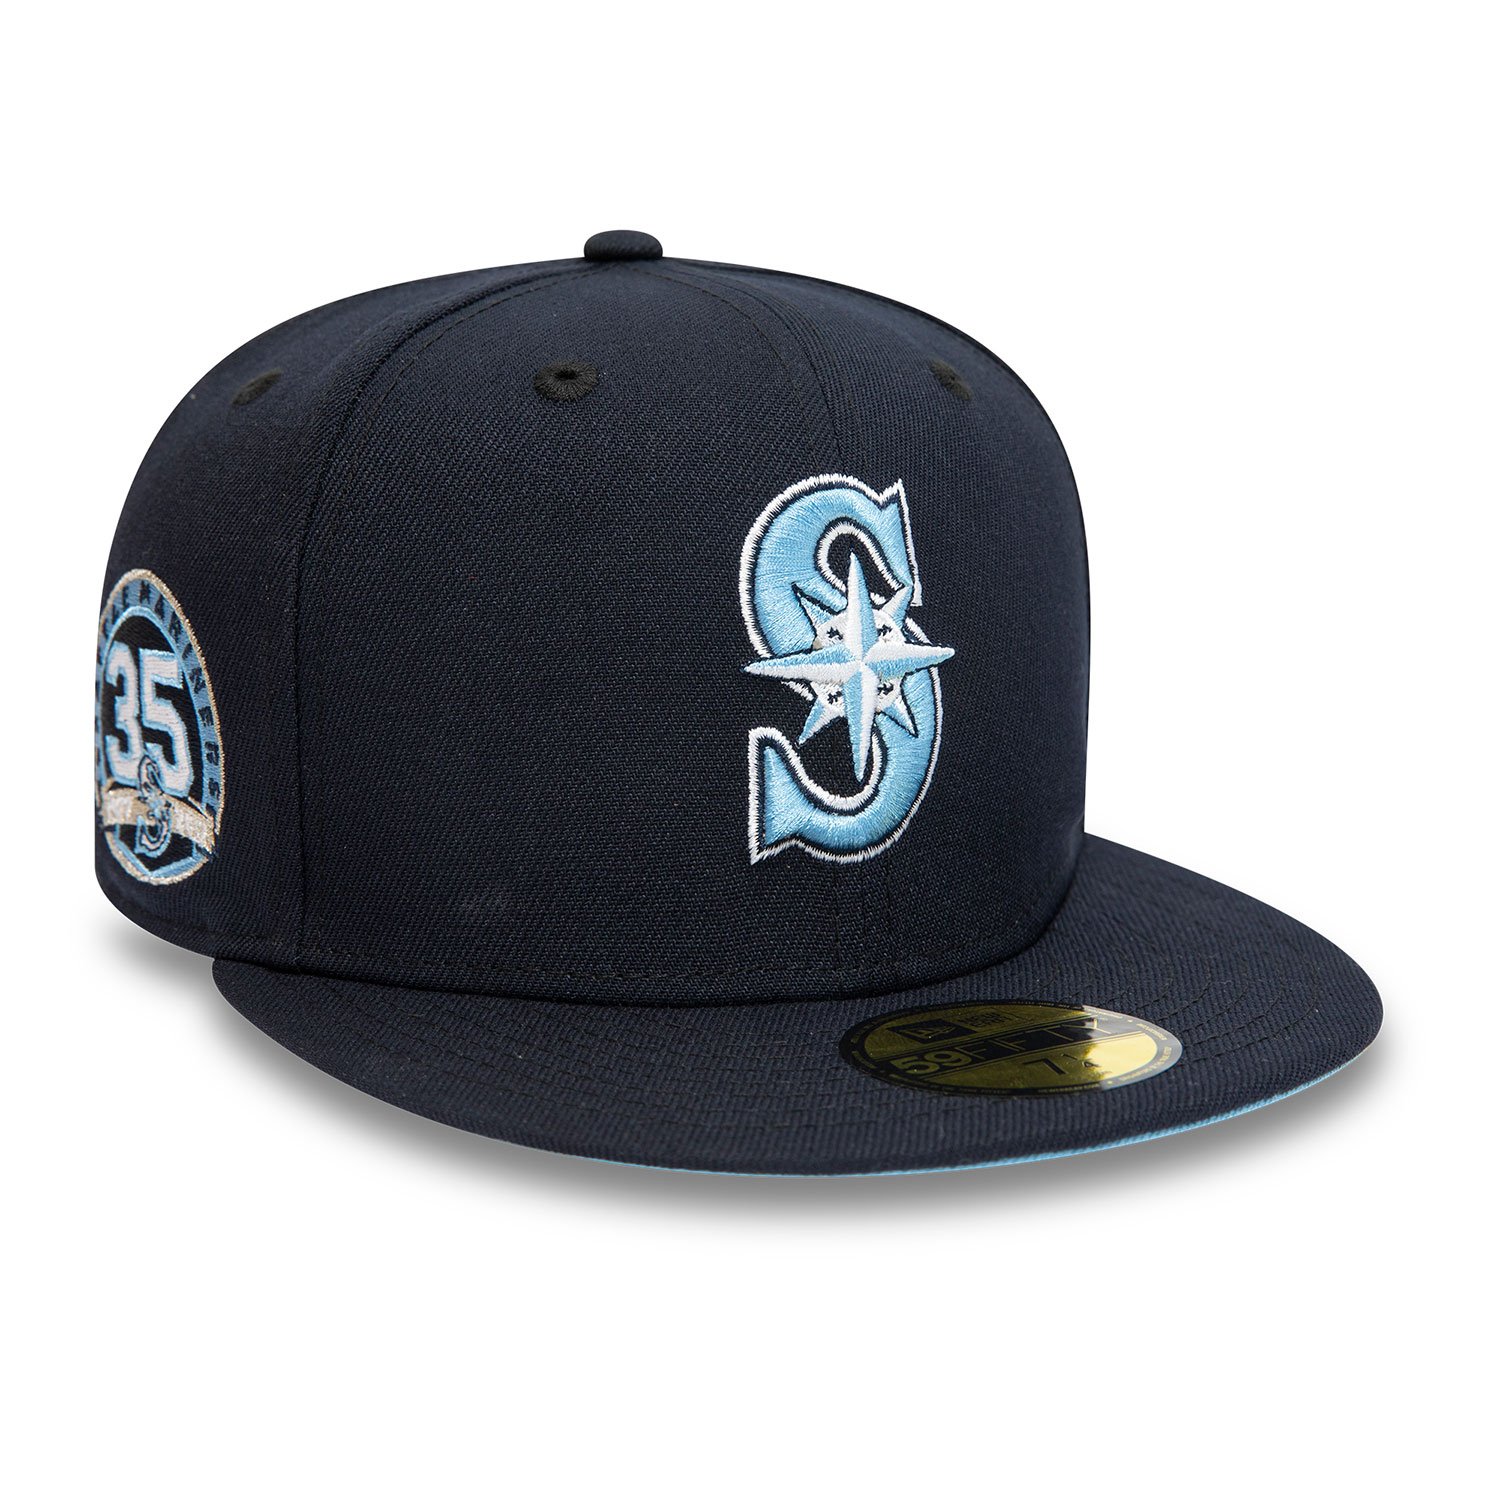 Seattle Mariners 35 Years Navy 59FIFTY Fitted Cap